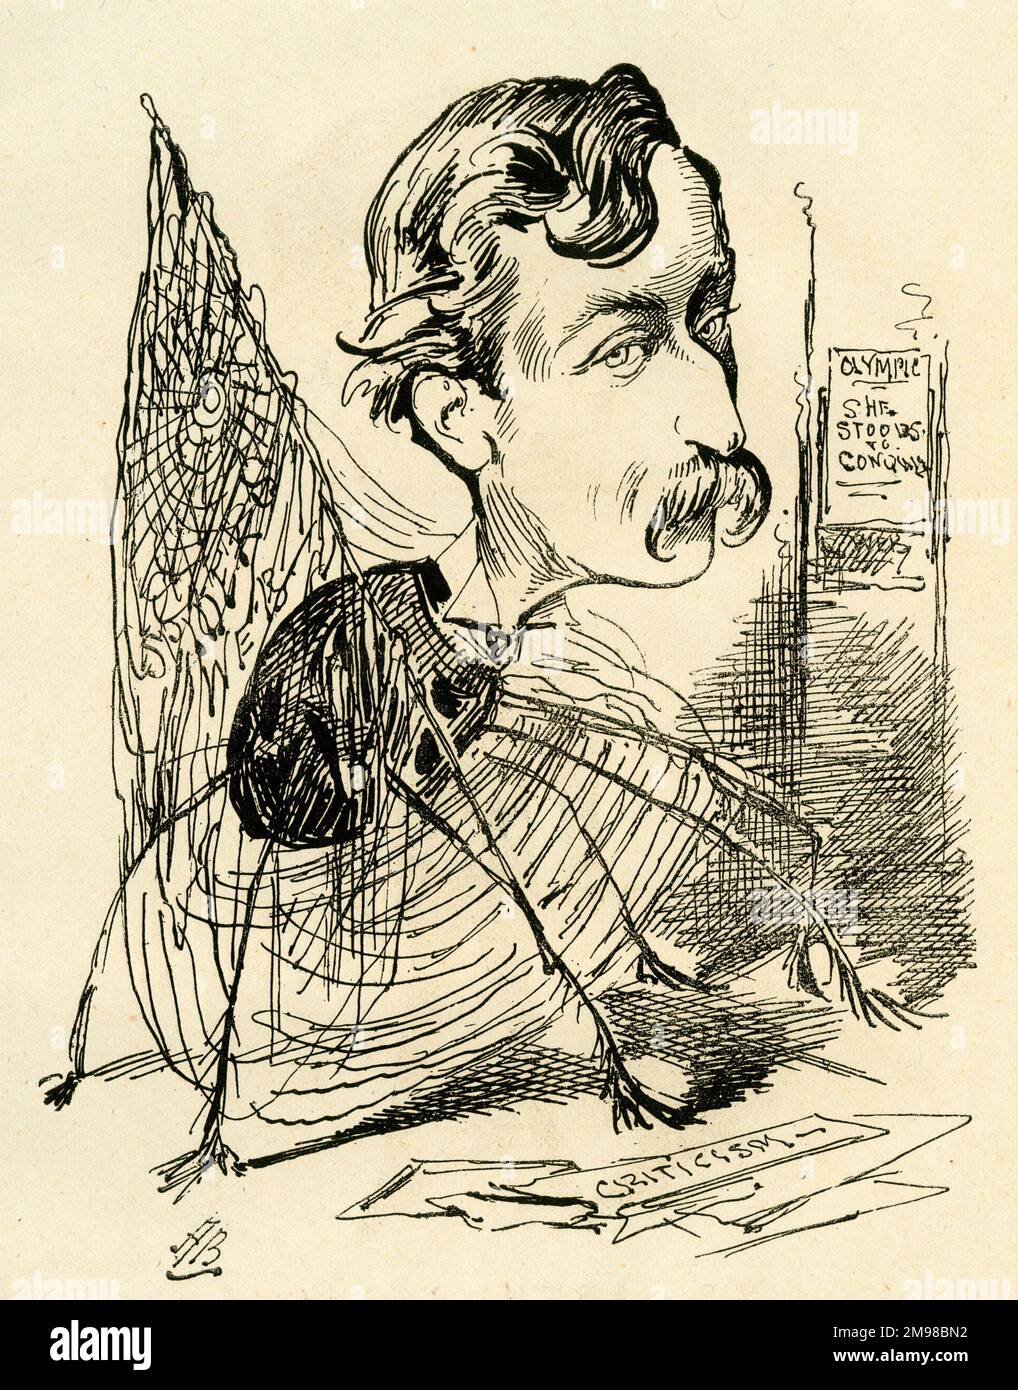 Cartoon, Mr Pettitt takes the Spider's Web to a better Pitch. A satirical comment on Henry Alfred Pettitt (1848-1893), British actor and dramatist, with a reference to the title of one of his plays, in production at the Olympic Theatre. Stock Photo